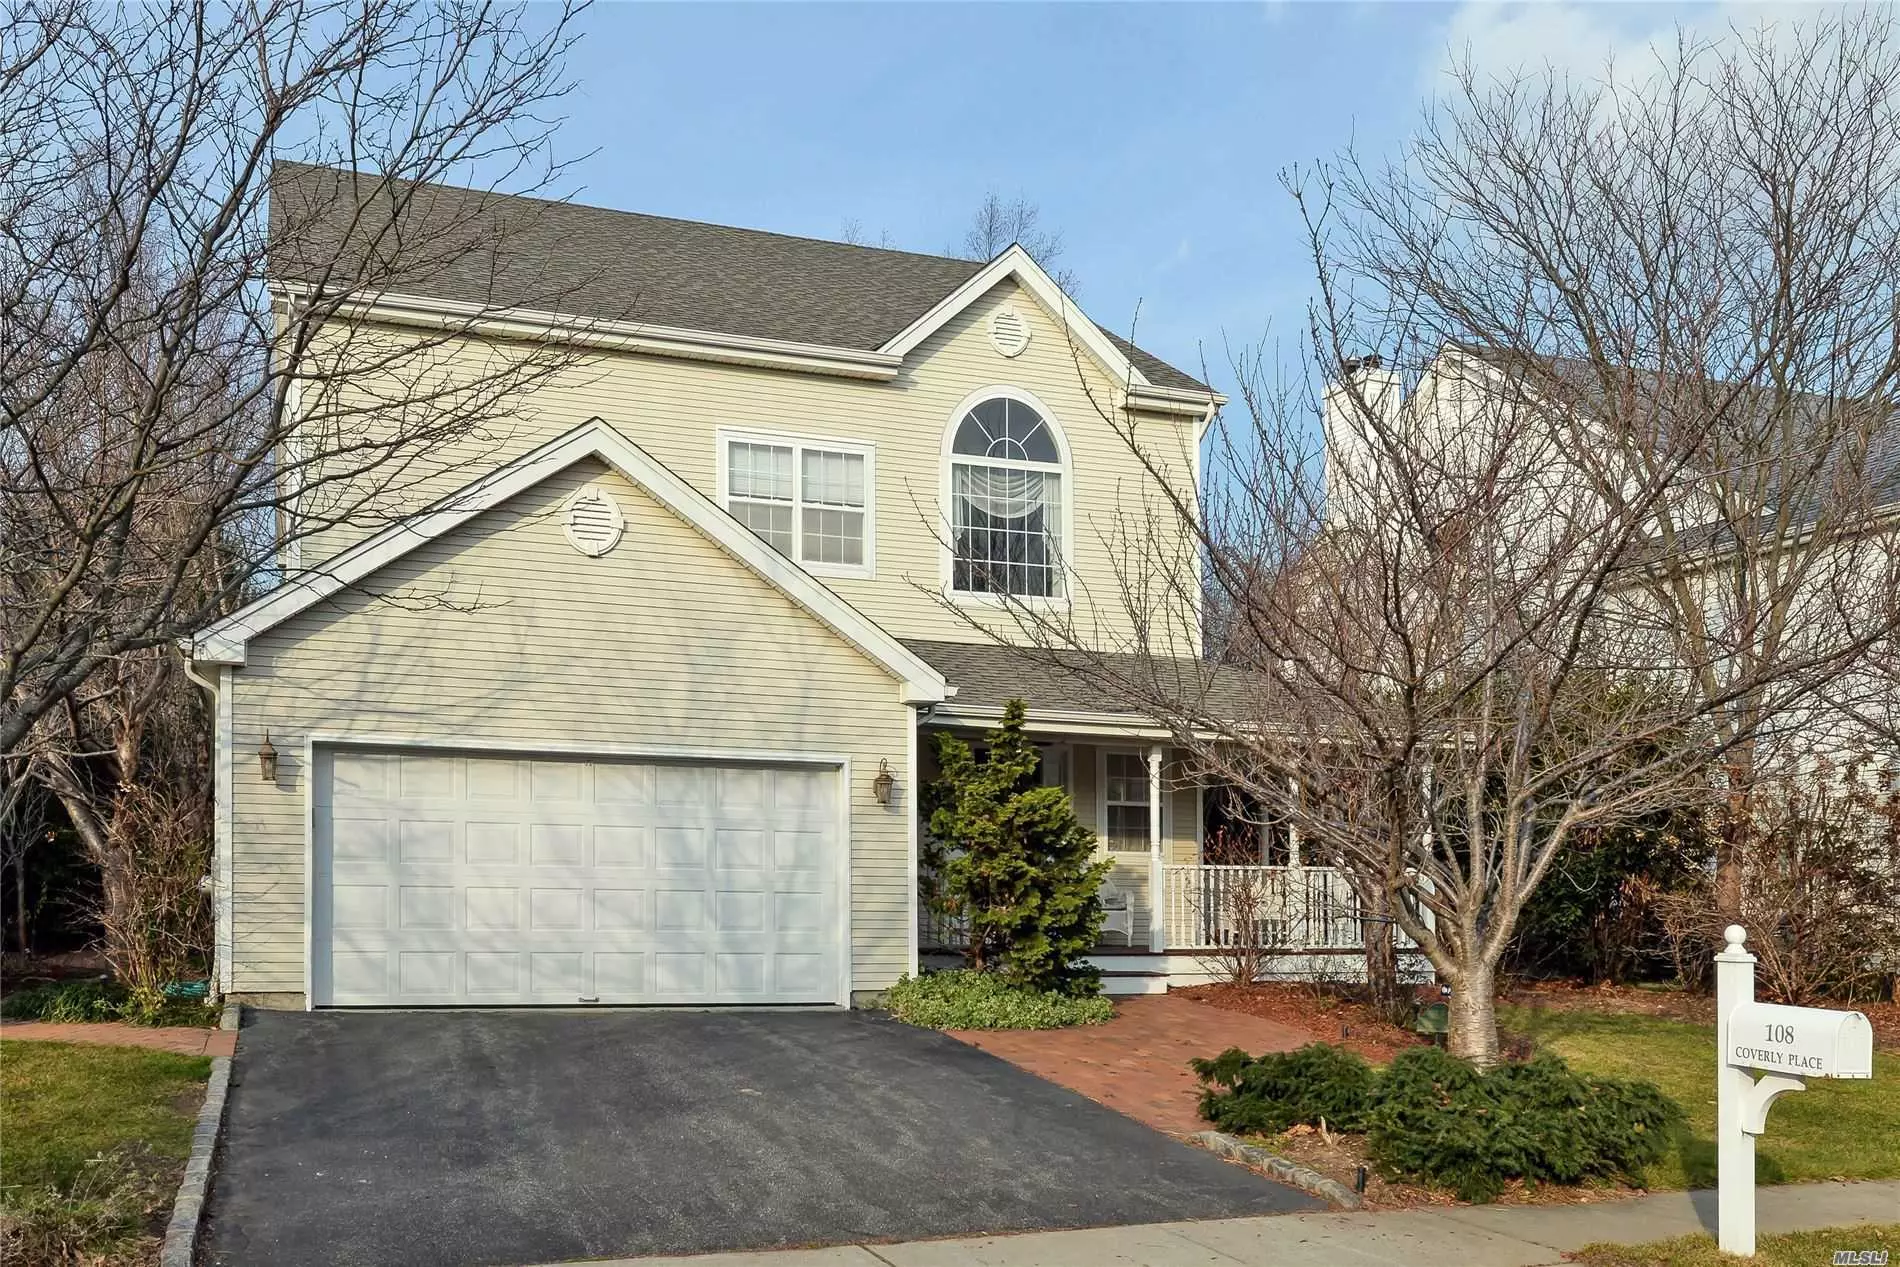 Amazing Opportunity! Highly Motivated Seller! Price Dropped $50K!! Prime midblock located Bennington 4 Bed/ 2.55 Bath Colonial in Full Amenity Gated Community, Granite and White EIK, 9 Ft Ceilings, Wood Flrs, Custom Millwork and Moldings, Full Finished Basement w/ Granite Bar, 2nd Fam Rm, LR w/ WBF. IGS, 200Amp. Grand Foyer, Huge Master w/ Tray Ceiling WIC&rsquo;s and Spa Sized Bath, Wrap Around Front Porch, Paver Patio and Built in BBQ, Wired for Surround Sound in/out,  An opportunity too good to pass up!